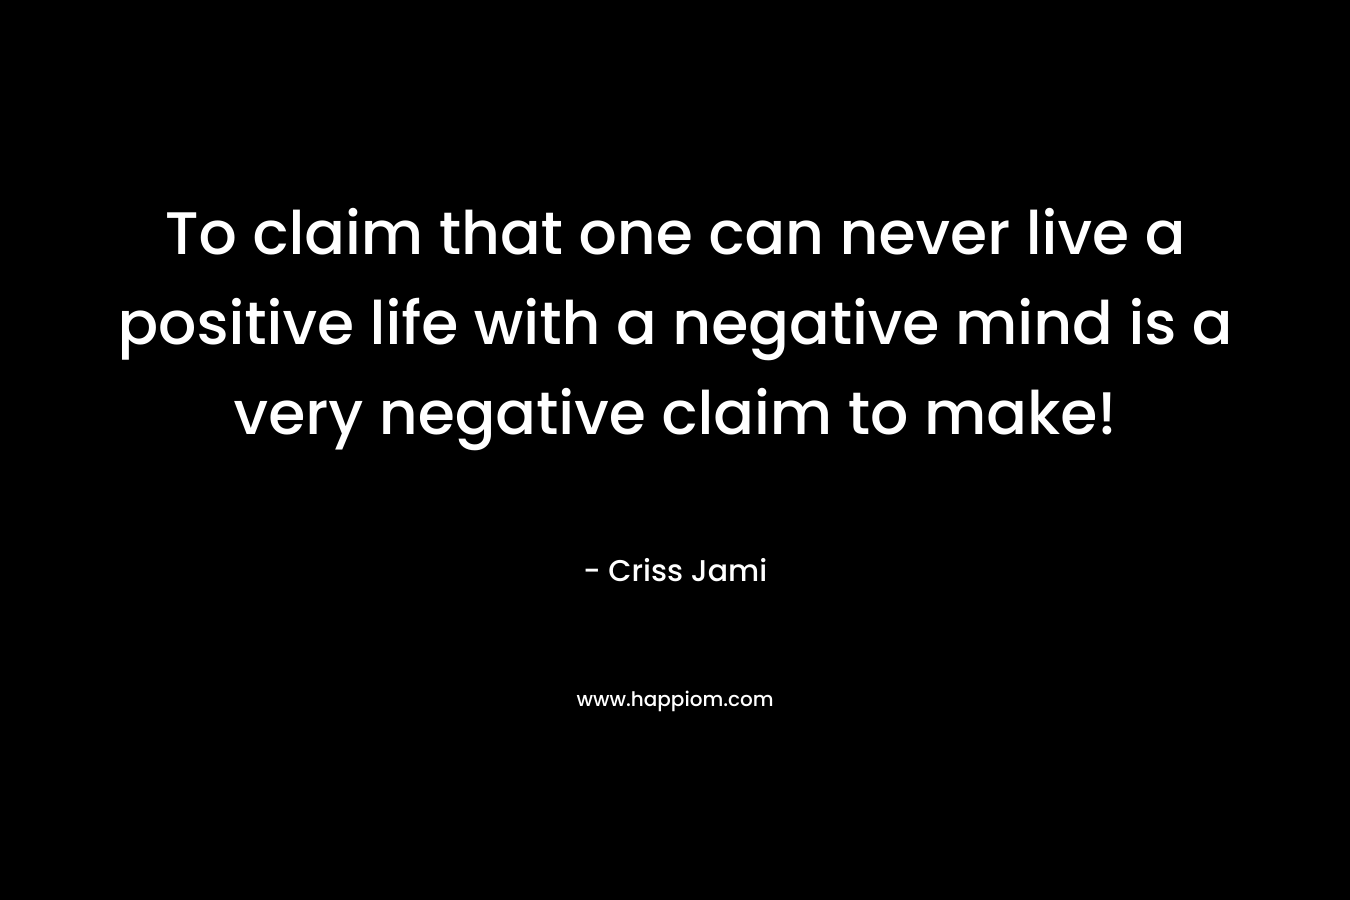 To claim that one can never live a positive life with a negative mind is a very negative claim to make!